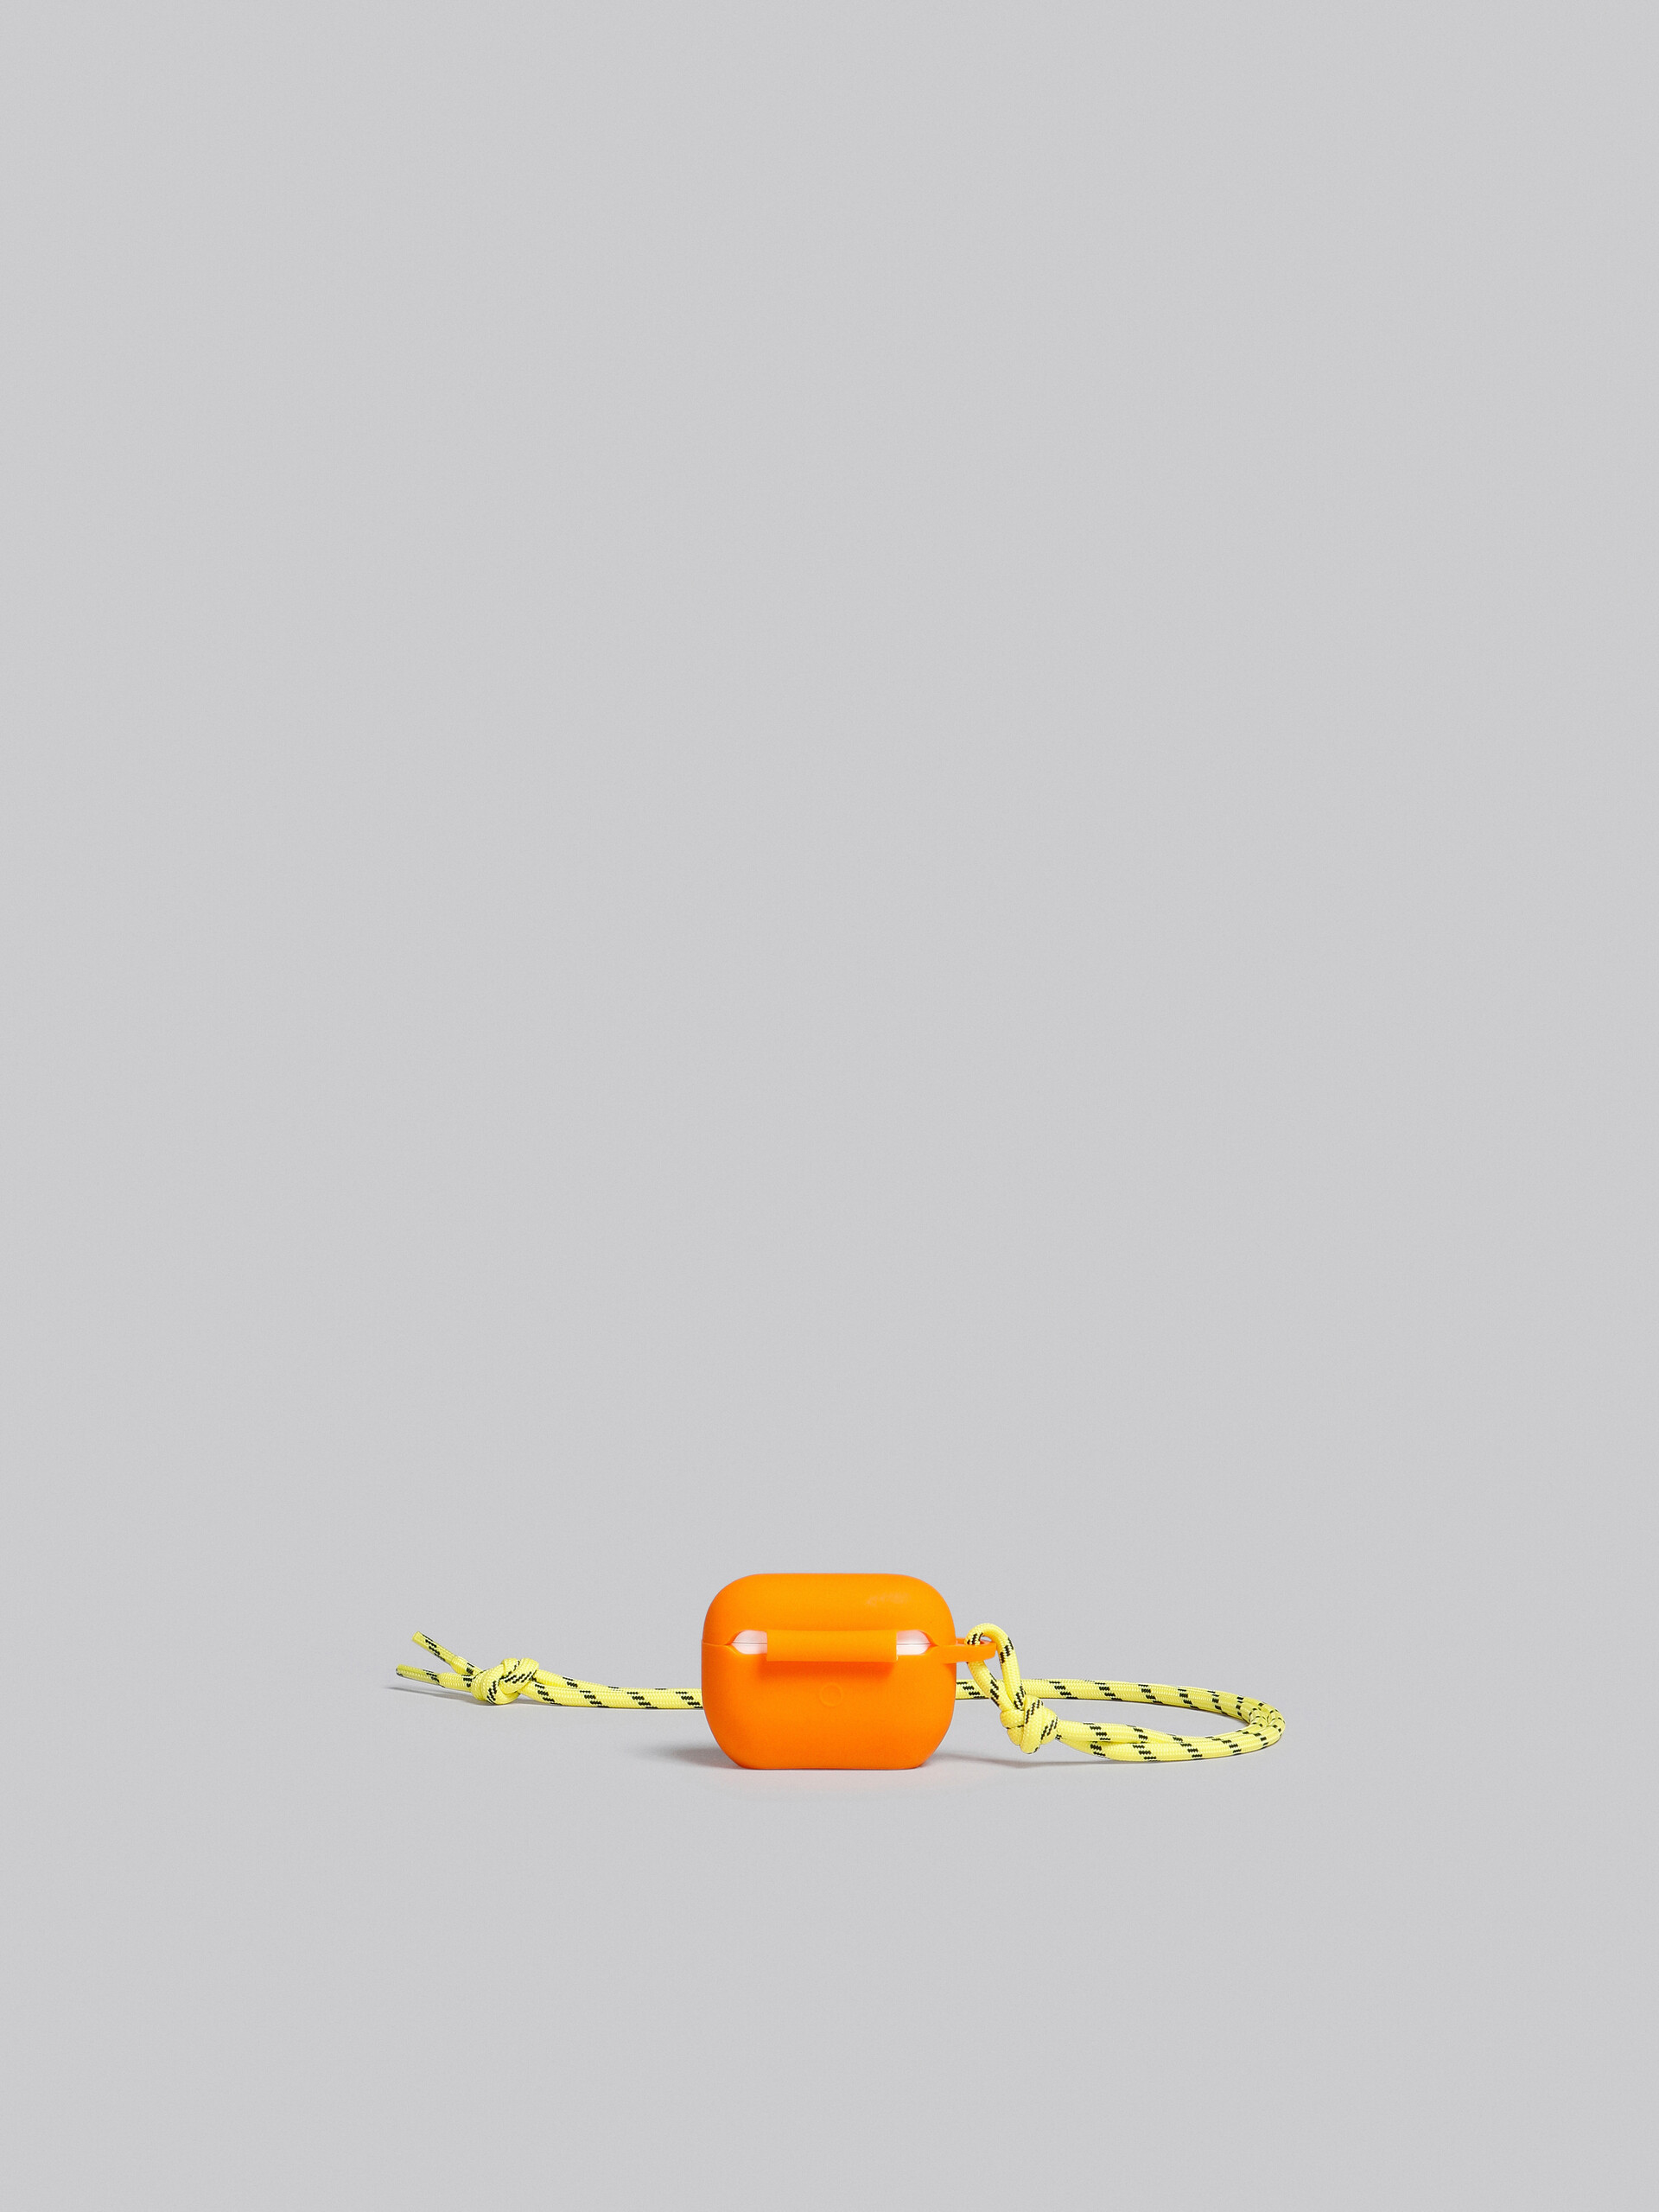 Marni x No Vacancy Inn - Orange and yellow Airpods case - Other accessories - Image 2